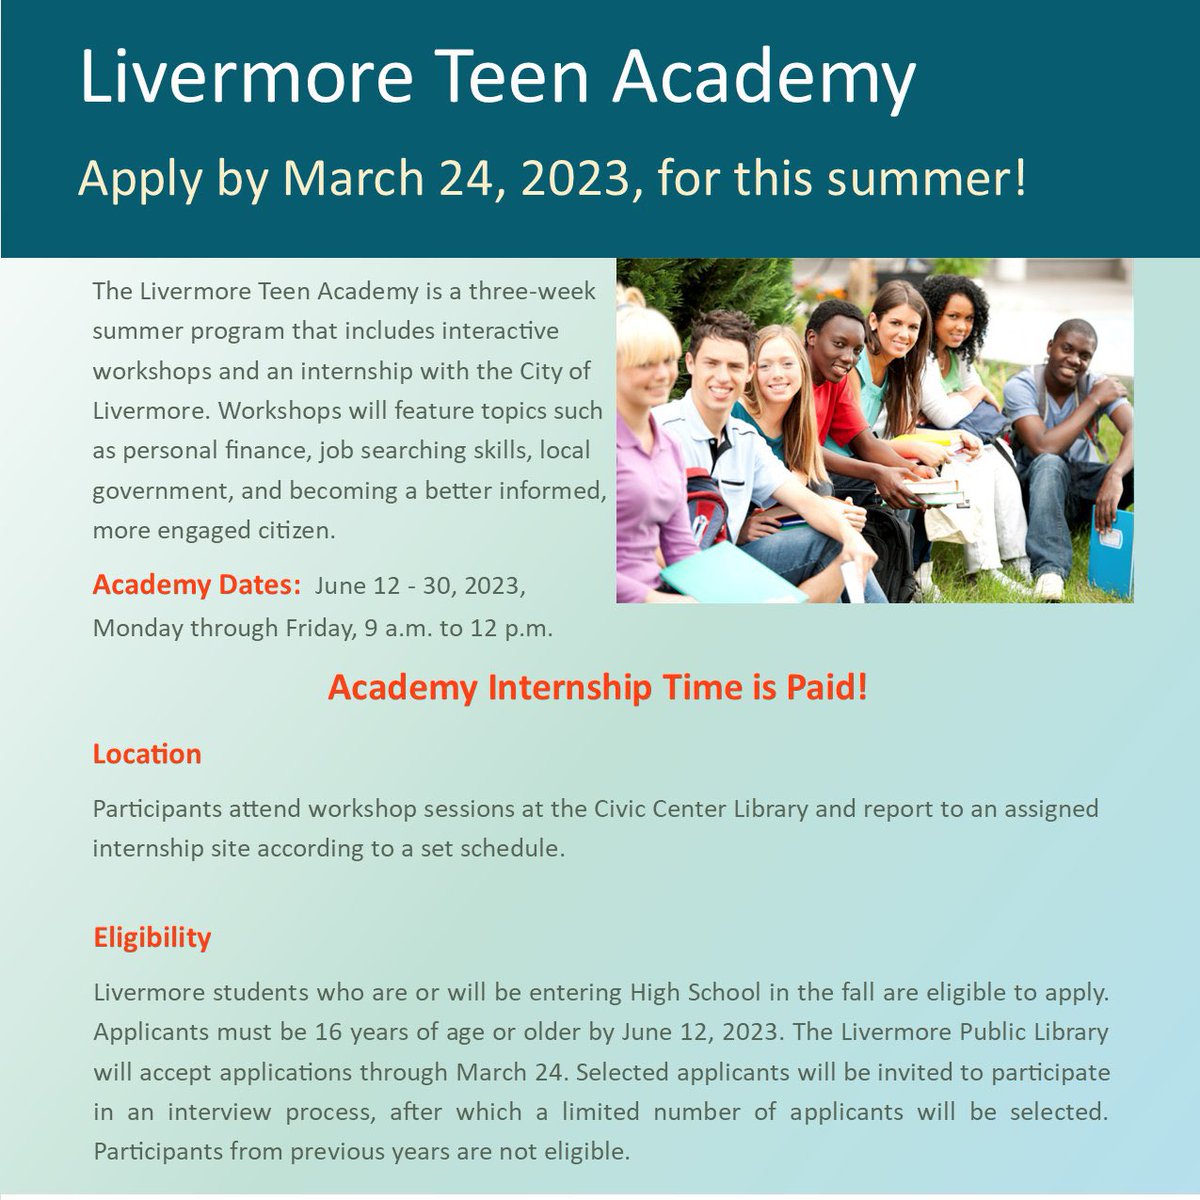 The @CityofLivermore has two exciting opportunities for #Livermore teens this summer!
 
📚 @LivLibrary is currently accepting applications for its Teen Academy that runs from June 12-30, Monday through Friday. This is geared toward youth interested in learning more about local